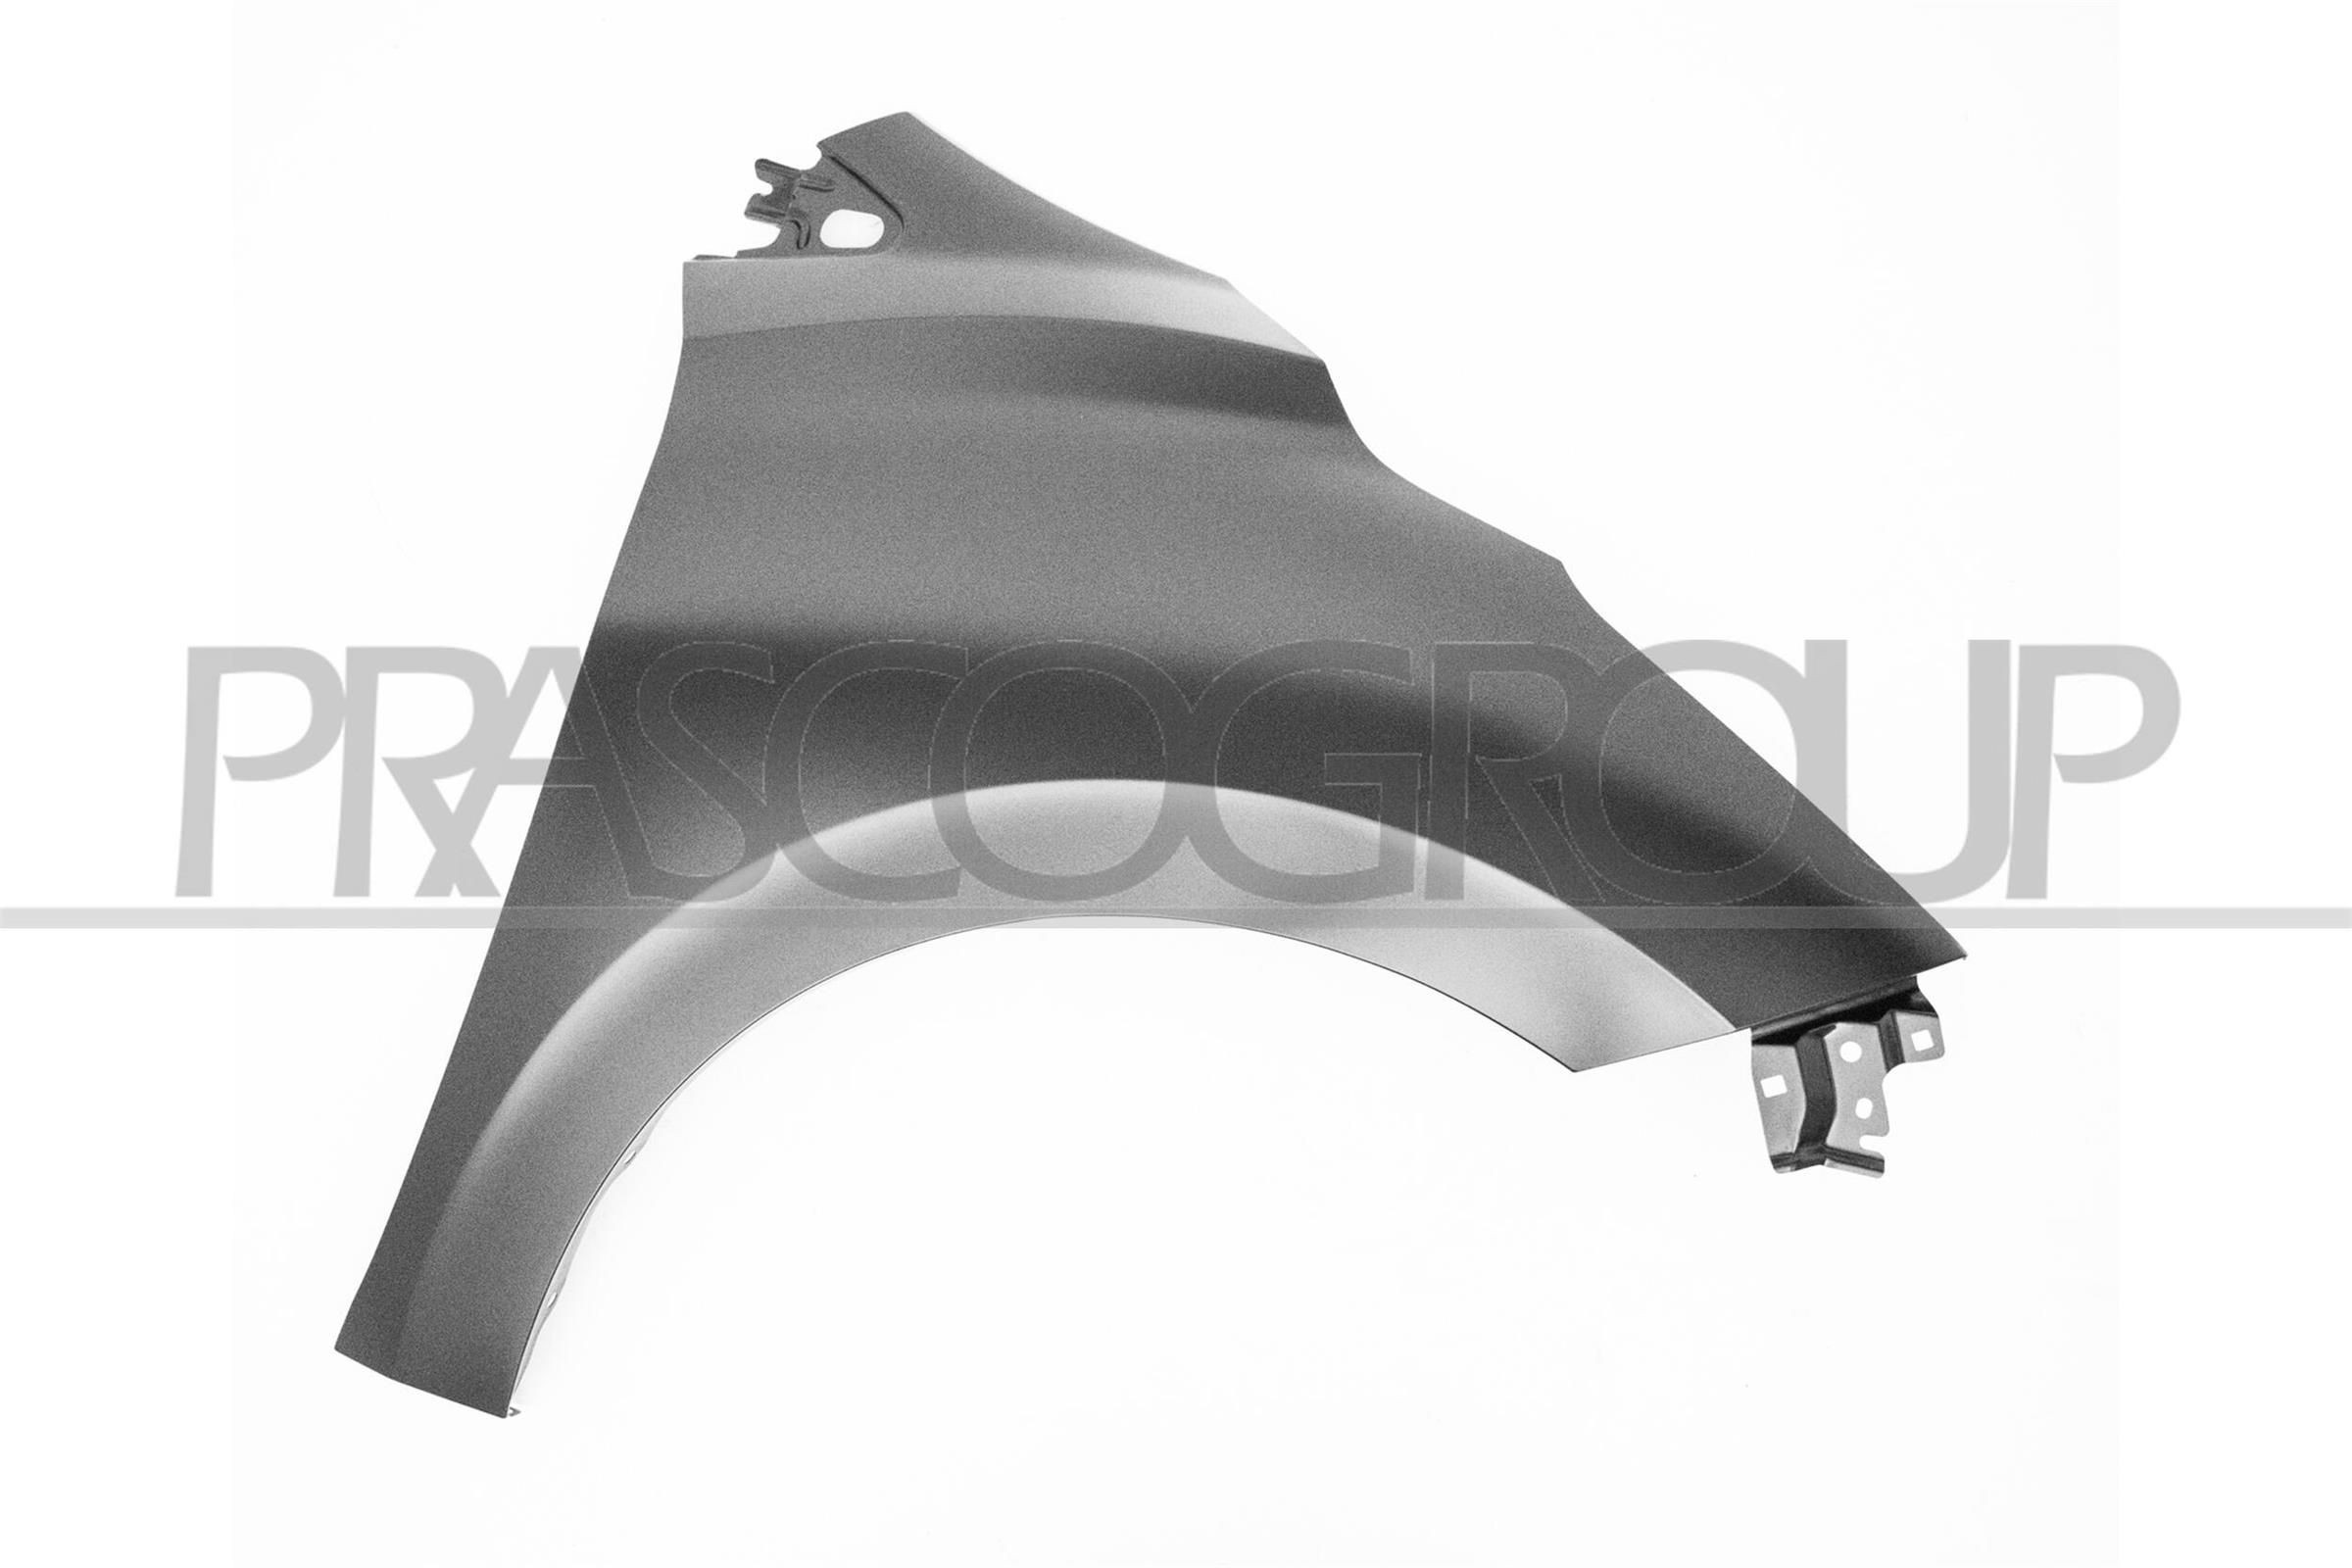 Nissan Wing fender PRASCO DS0163003 at a good price